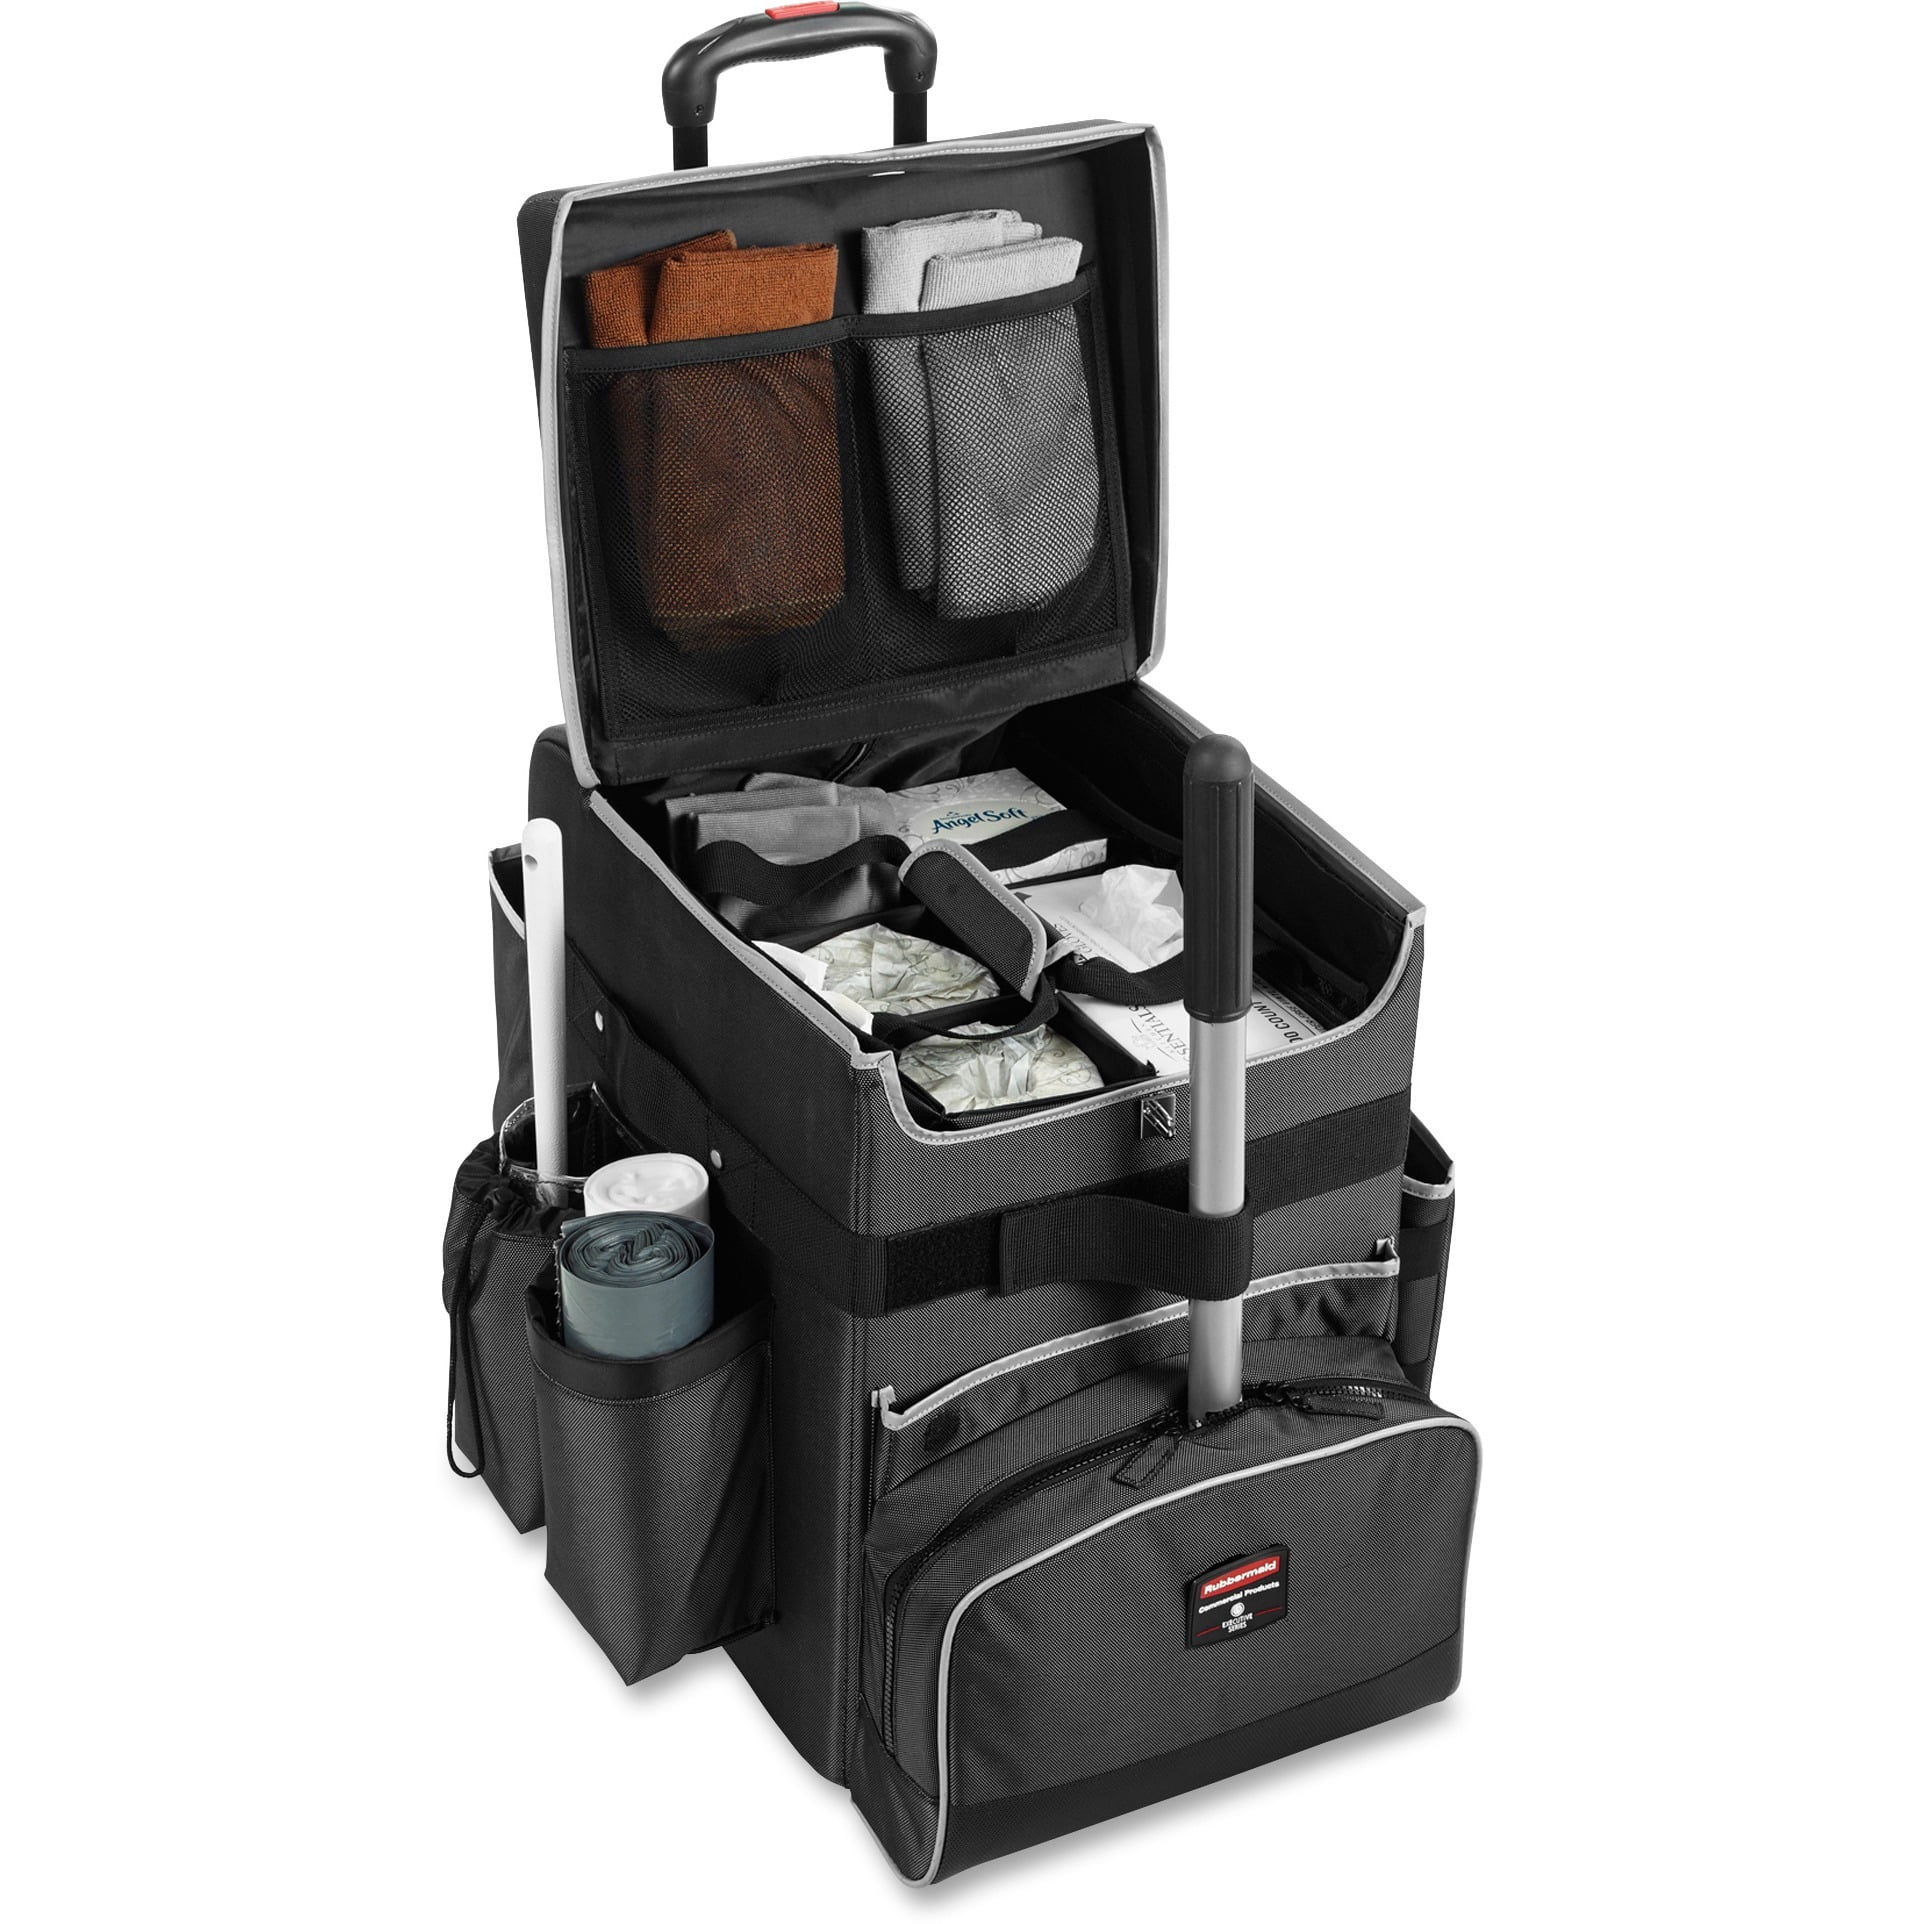 Newell Rubbermaid 315488BLA Janitor All-Purpose Carry Caddy 